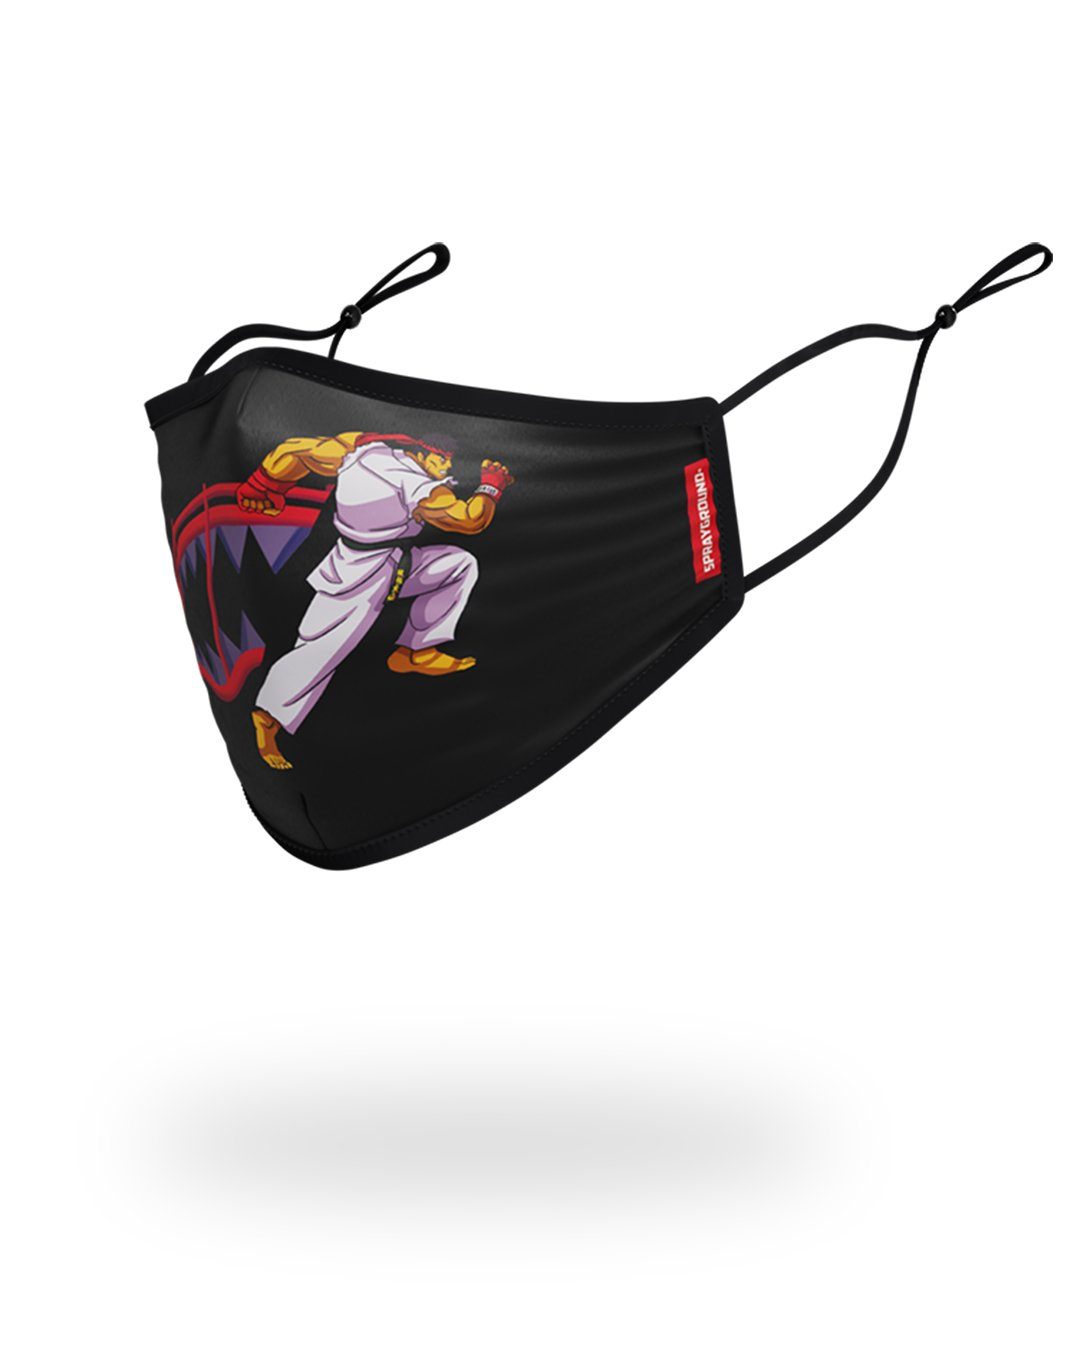 SPRAYGROUND® FASHION MASK ADULT STREET FIGHTER RYU SHARK FORM FITTING FACE-COVERING